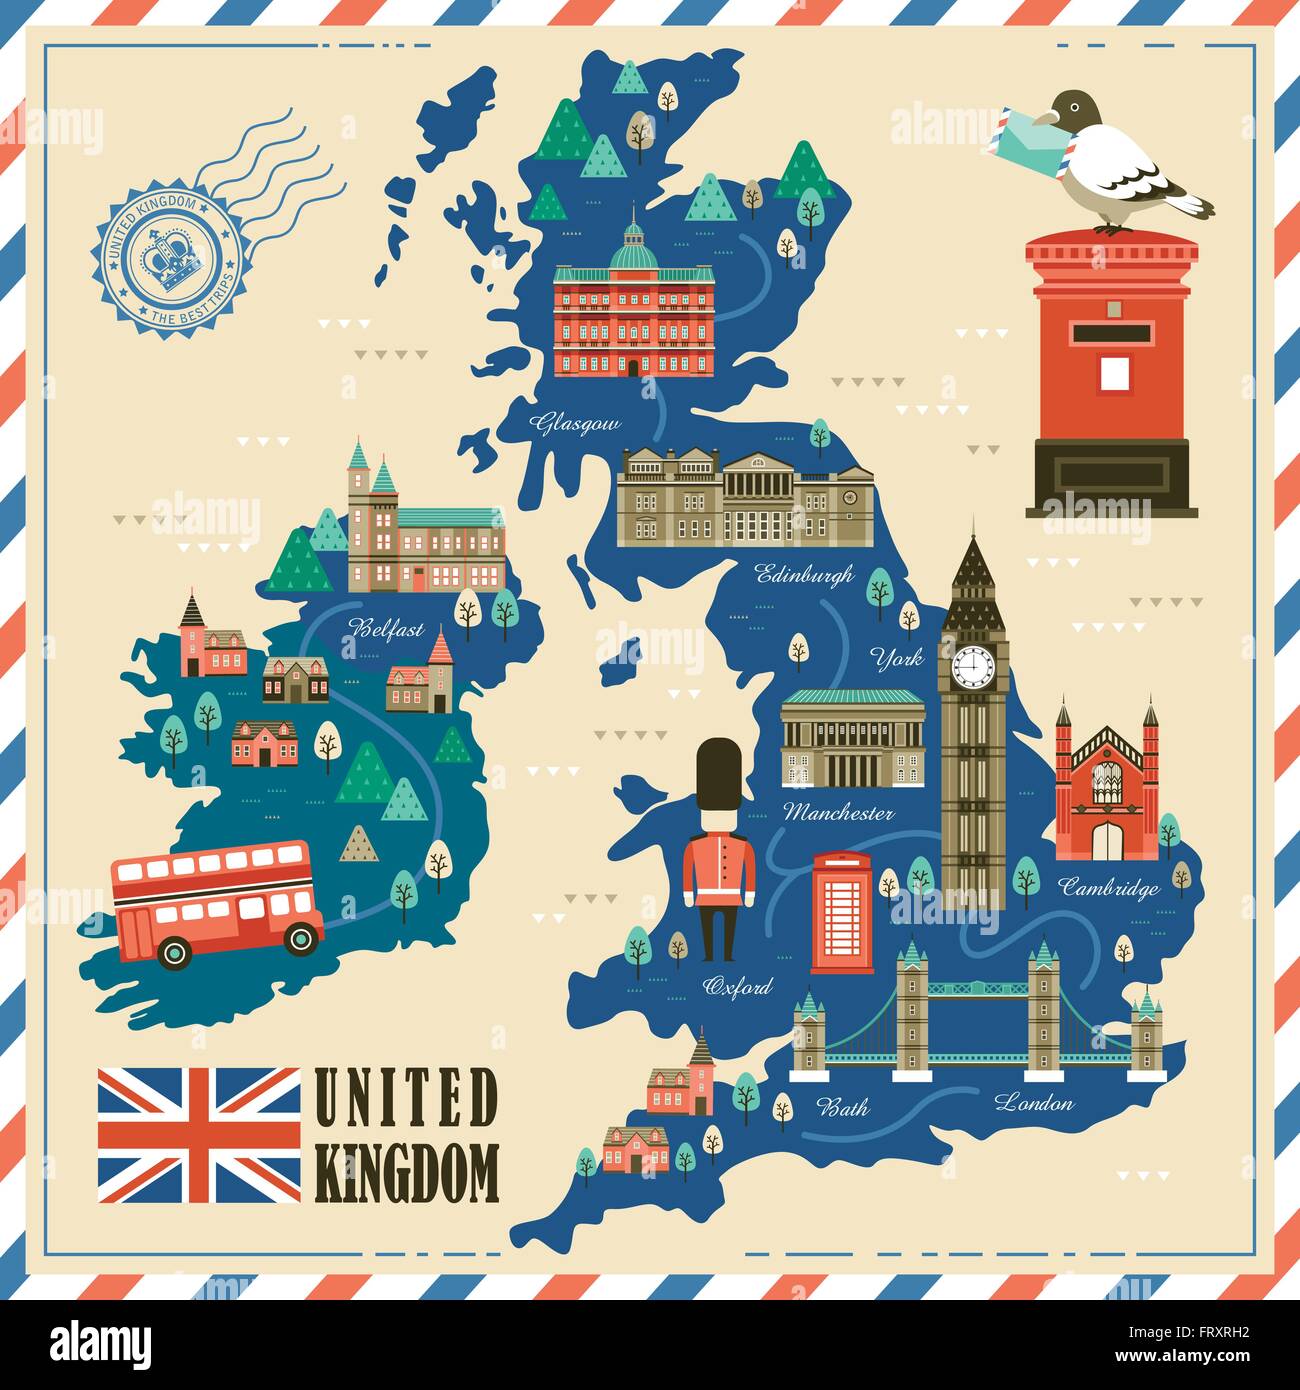 lovely United Kingdom travel map with attractions Stock Vector